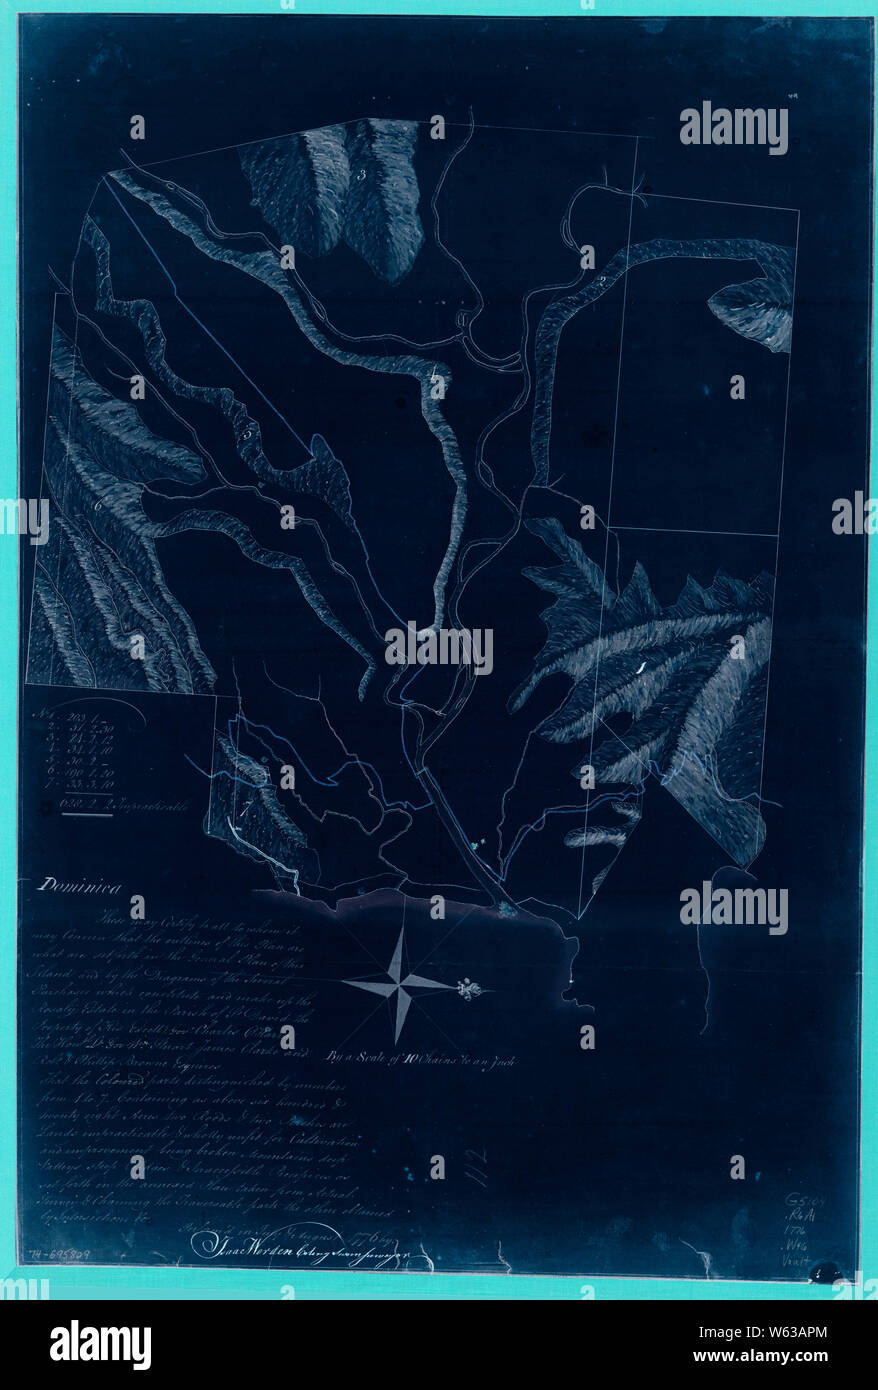 American Revolutionary War Era Maps 1750-1786 244 A plan of the Rosalij Compy Estates showing the impracticable lands Inverted Rebuild and Repair Stock Photo